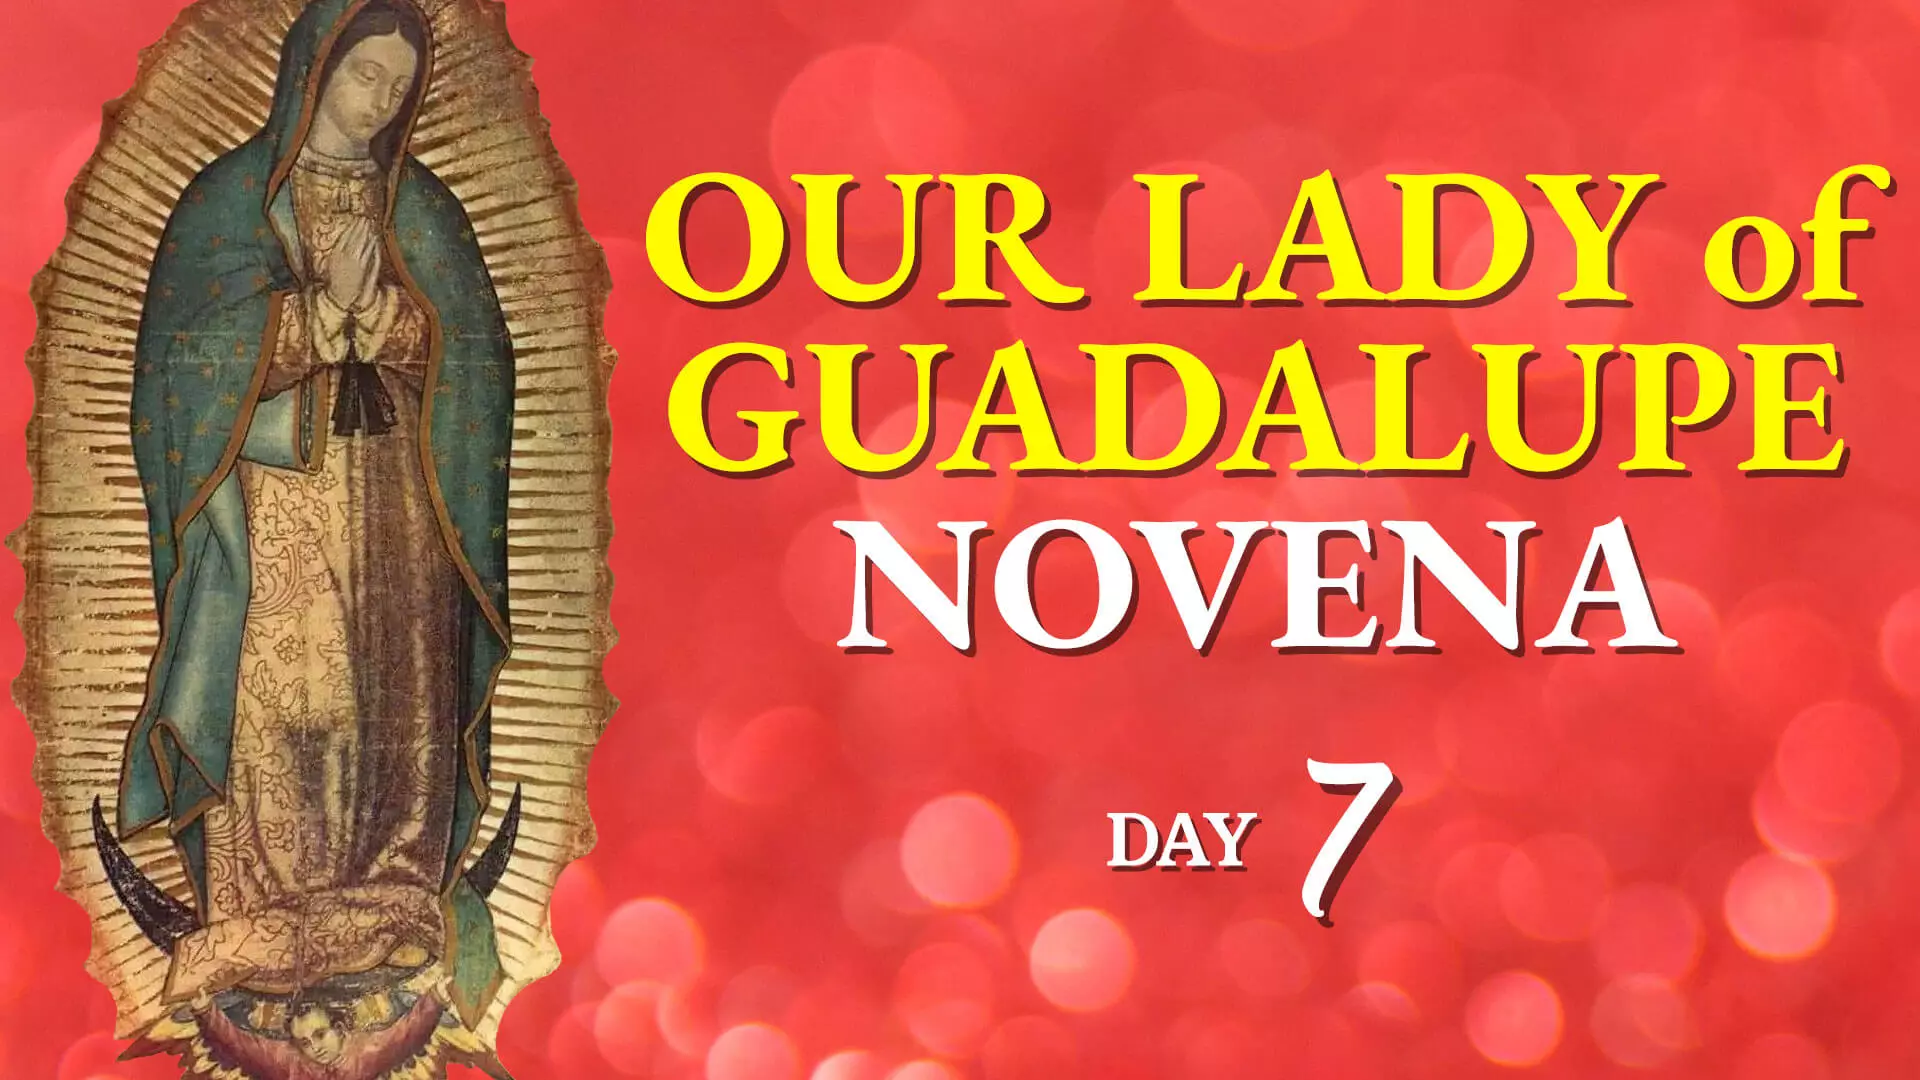 Our Lady of Guadalupe Novena Day 7